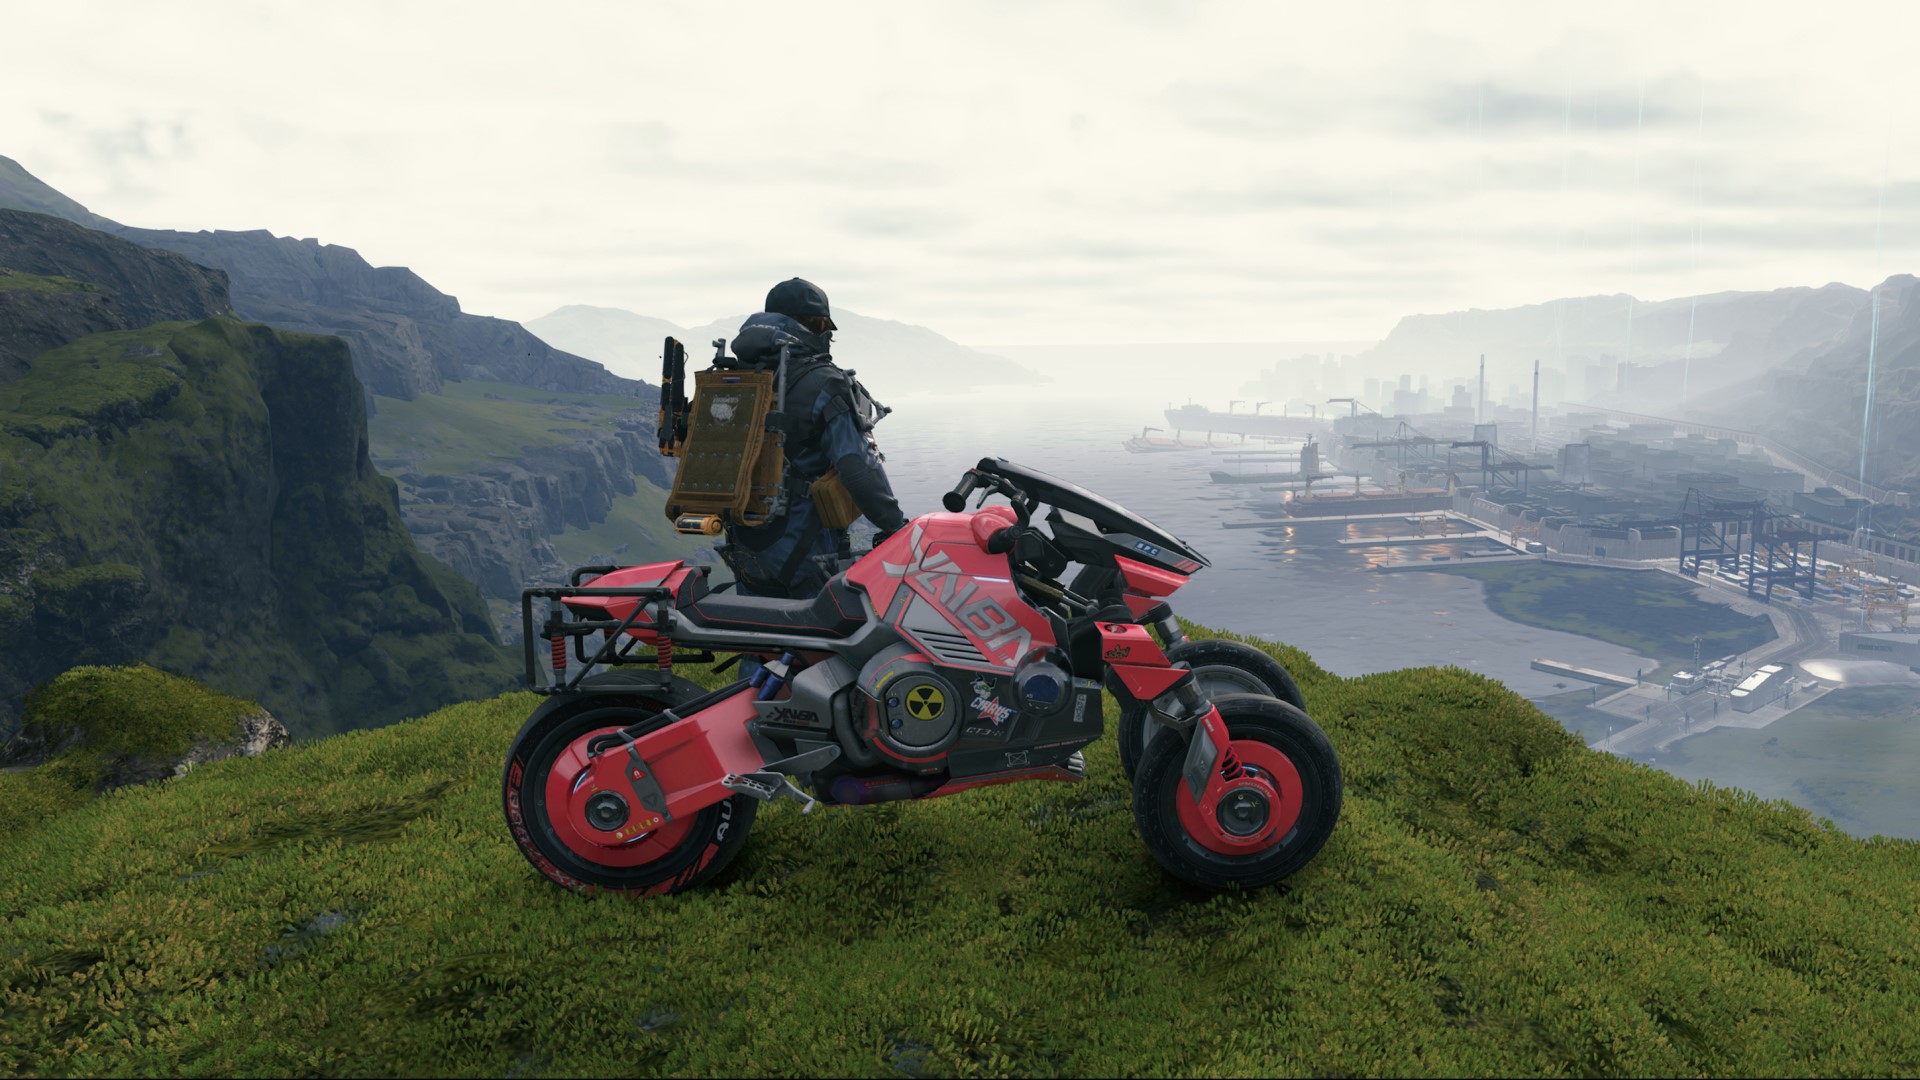 Death Stranding on PC includes new Cyberpunk 2077 crossover